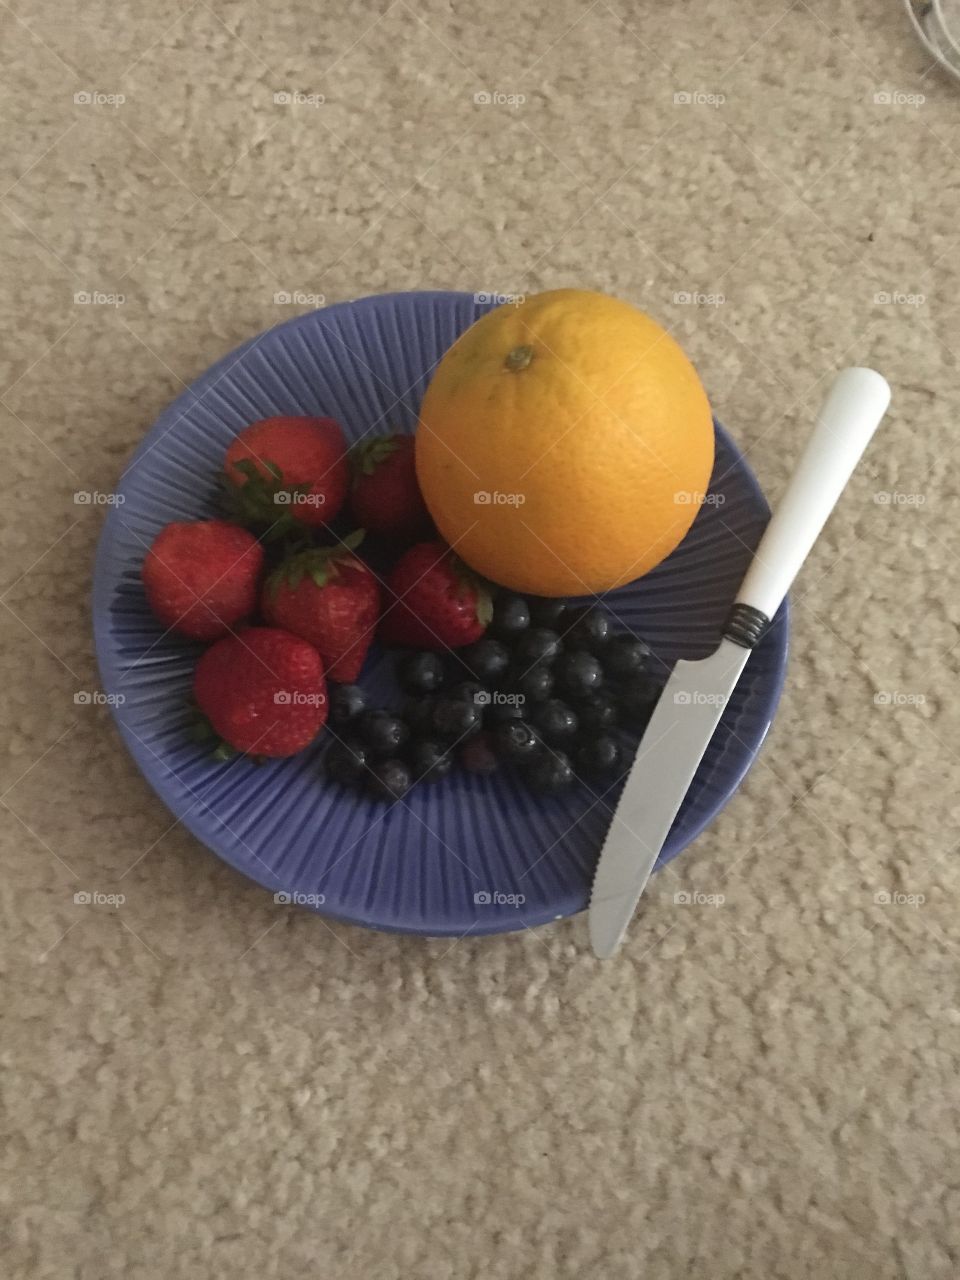 Strawberries, blueberries, and an orange - a complete breakfast if I do say so myself.